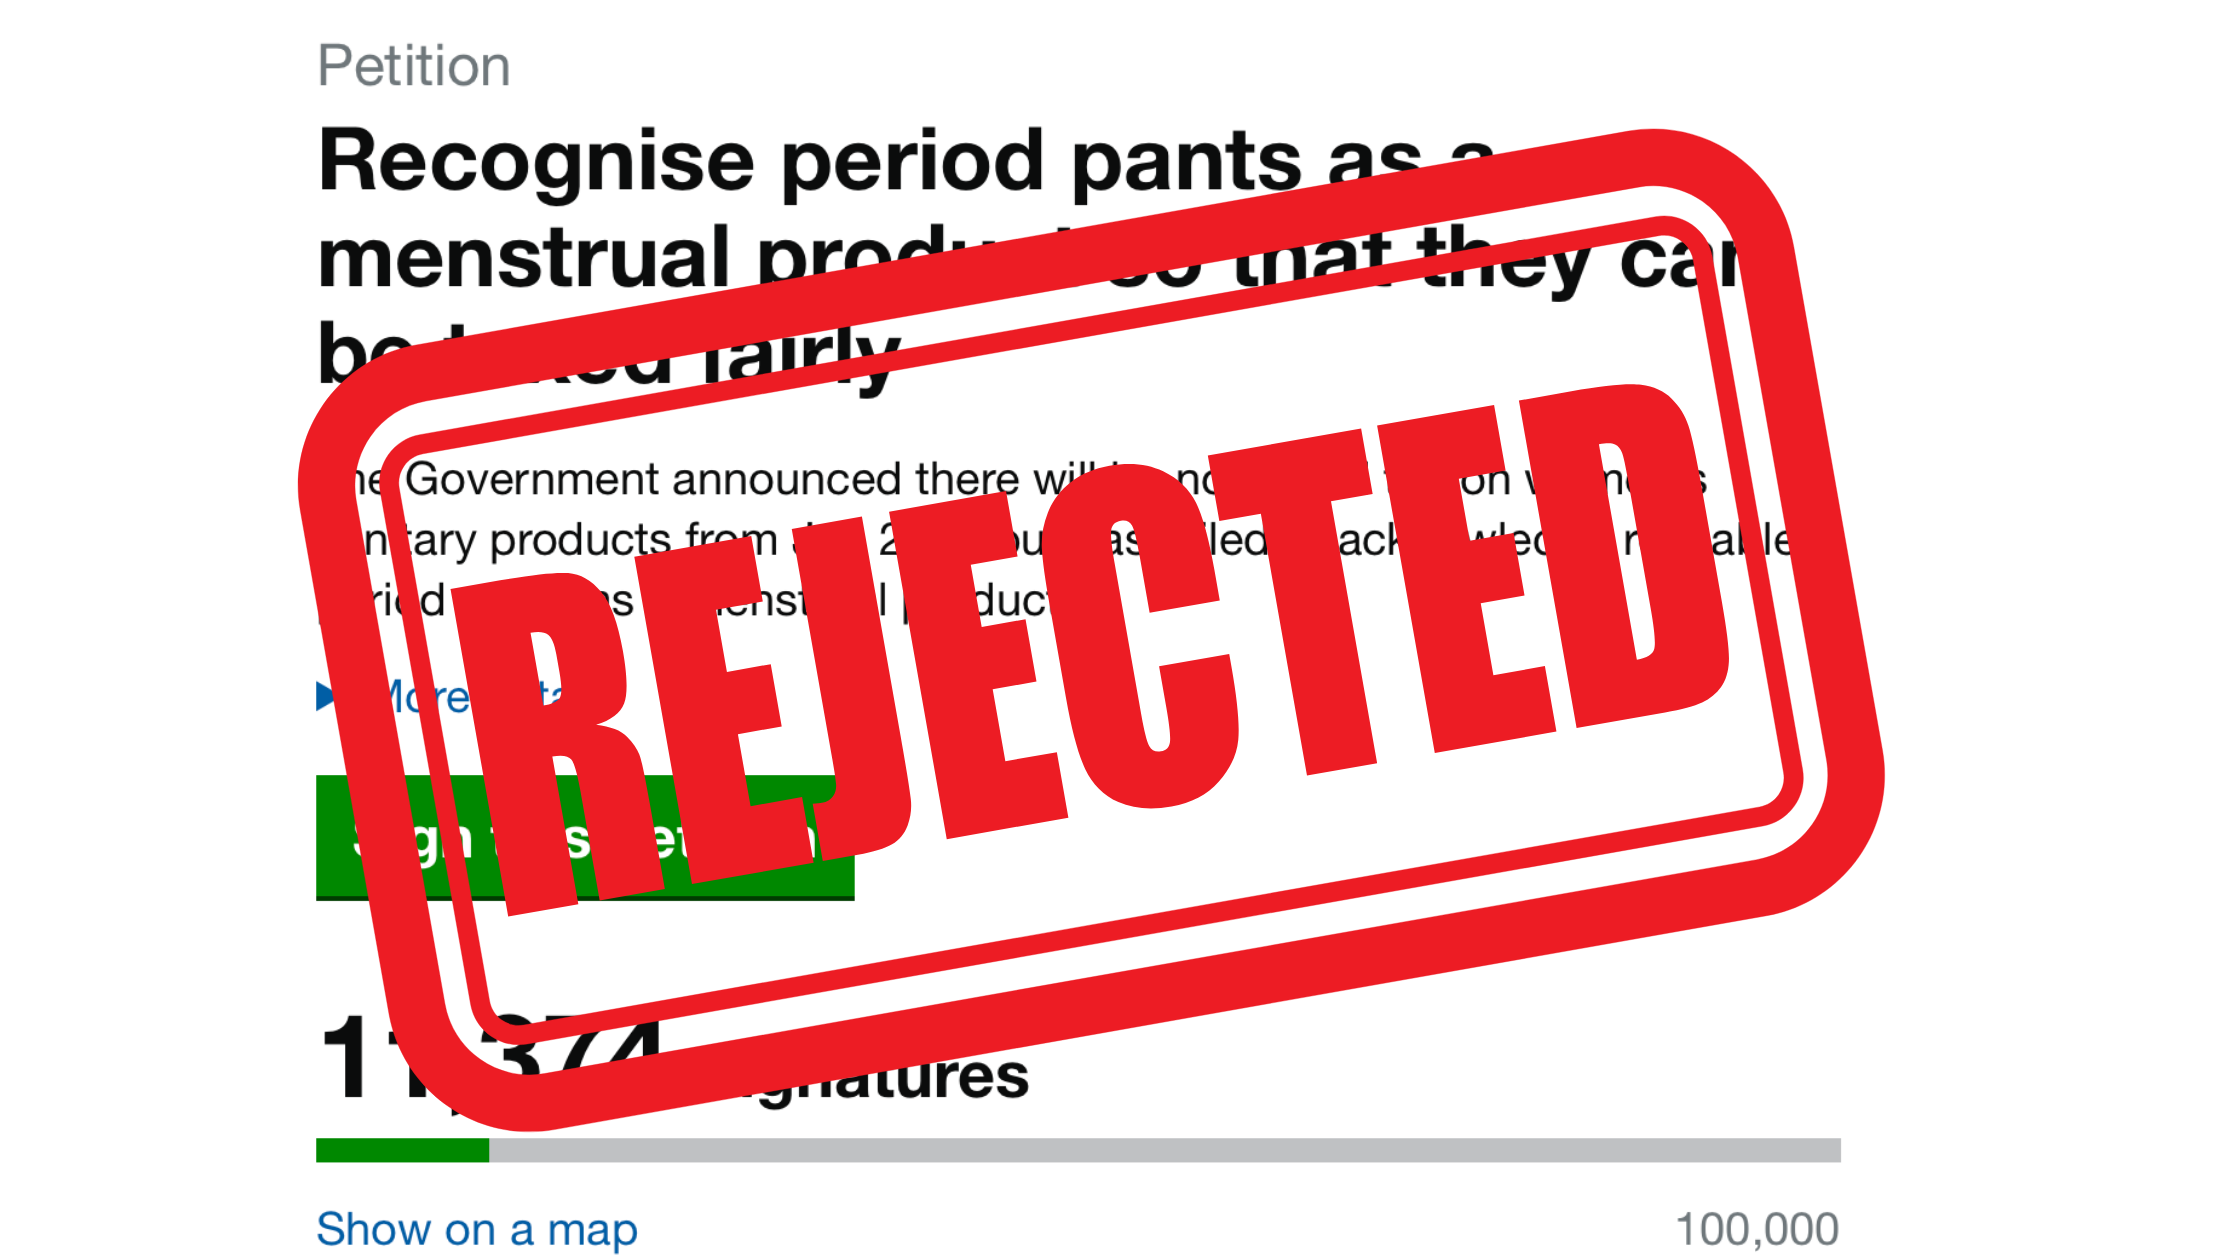 Primark Join M&S and WUKA's Call On Government To Remove VAT From Period  Pants